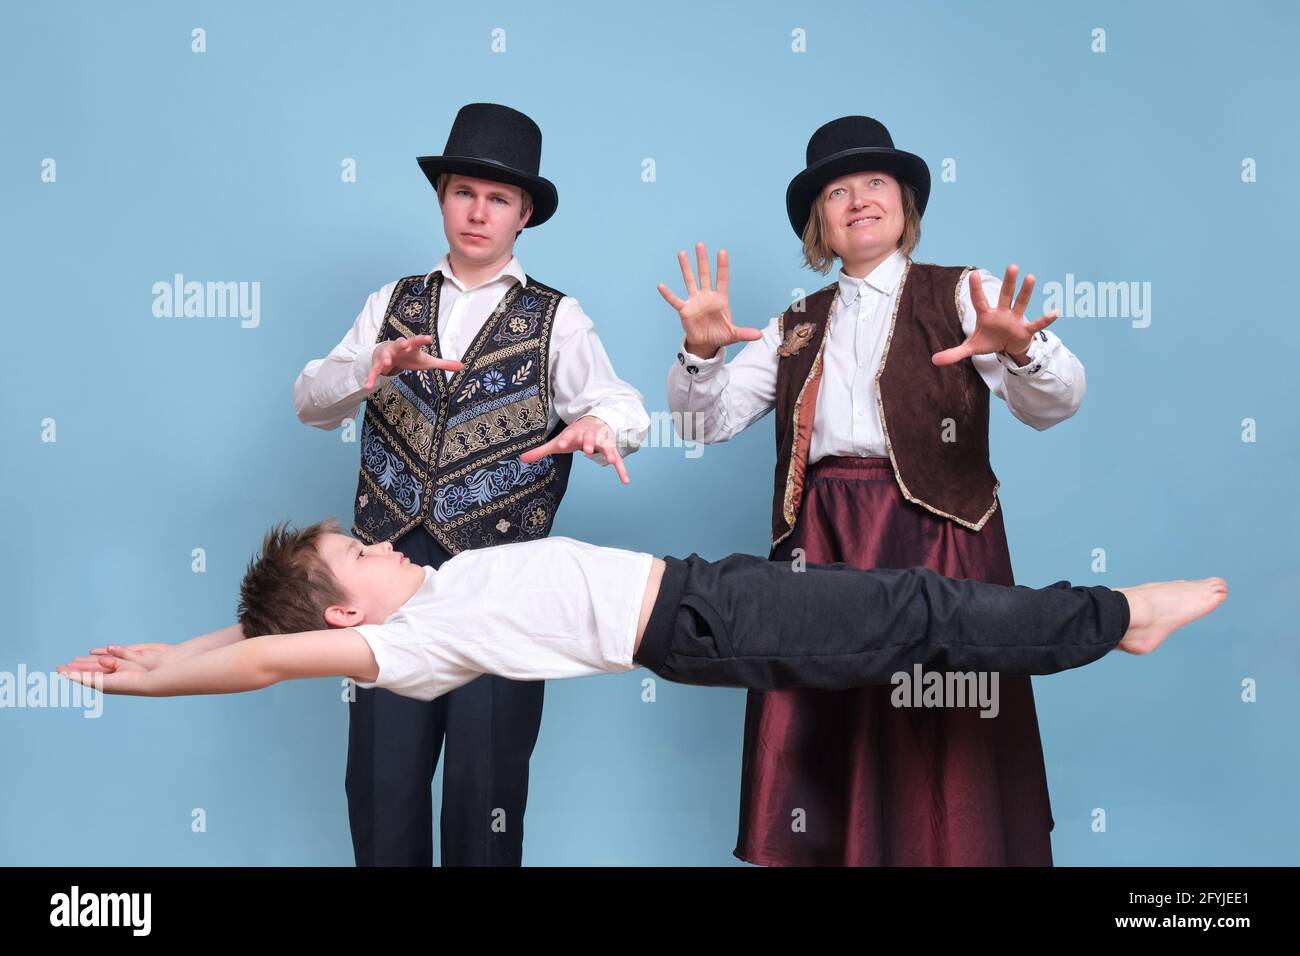 Magicians levitated a boy in the air, circus performers on a blue background Stock Photo